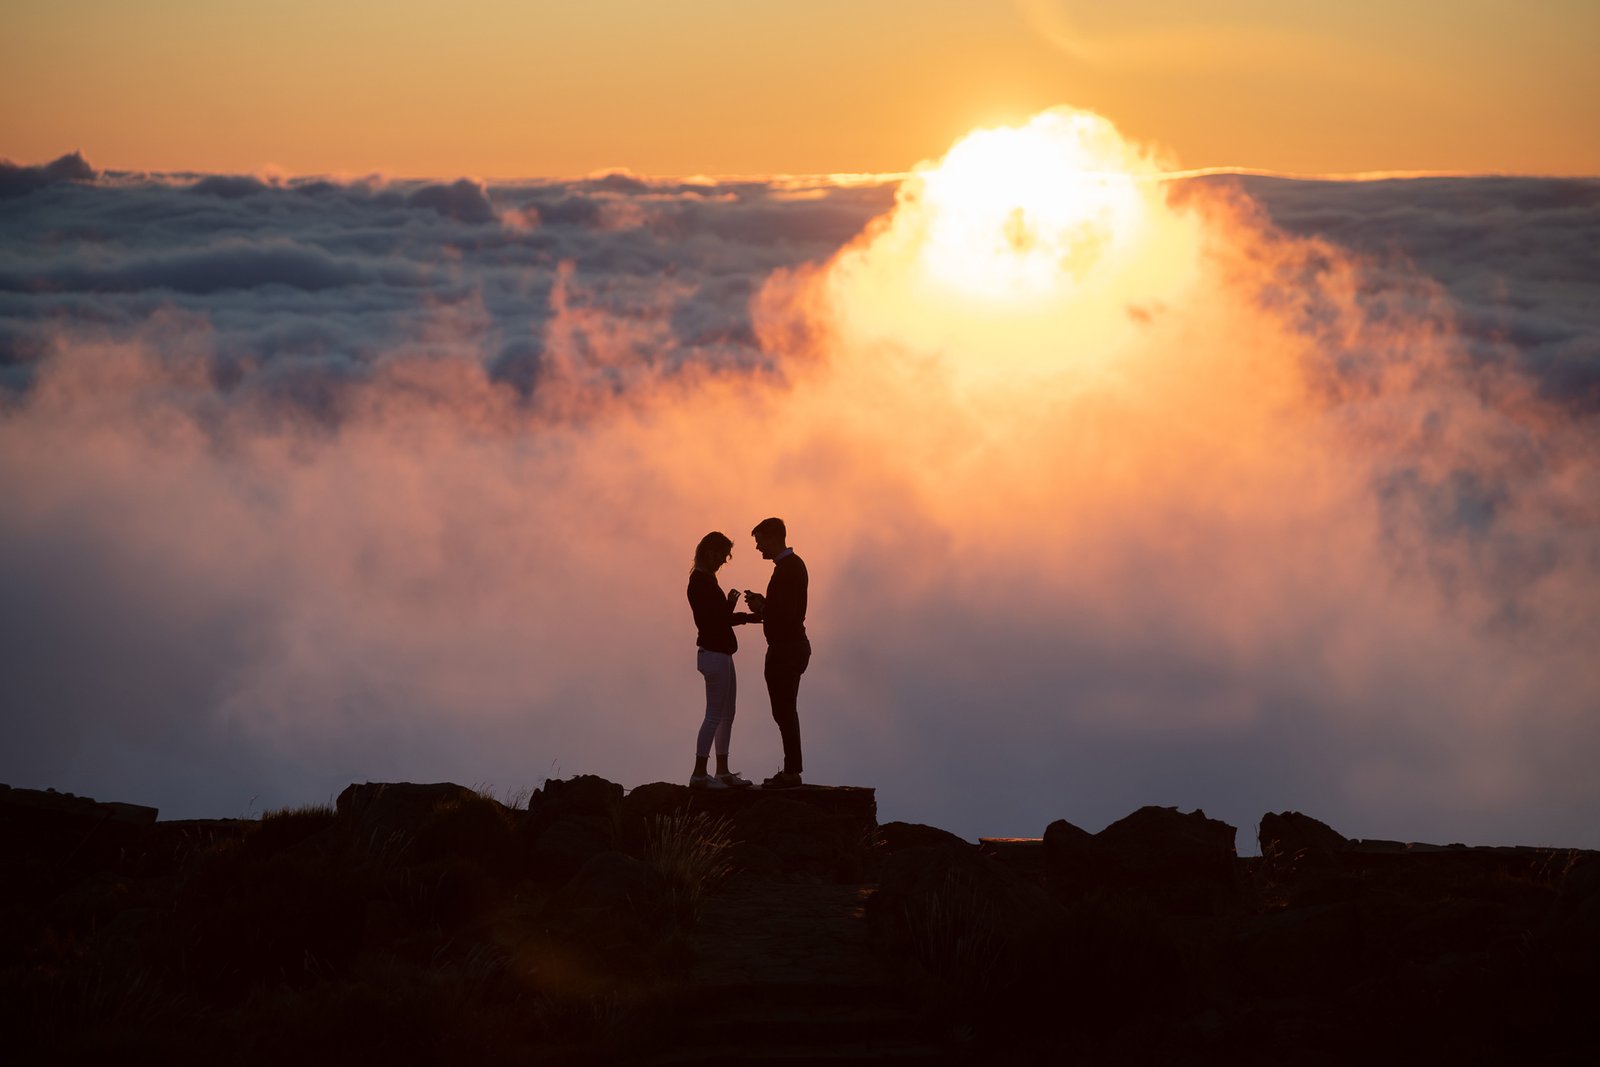 he put a proposal ring to her finger in front of the sun, above the clouds, Arieiro Peak, Madeira